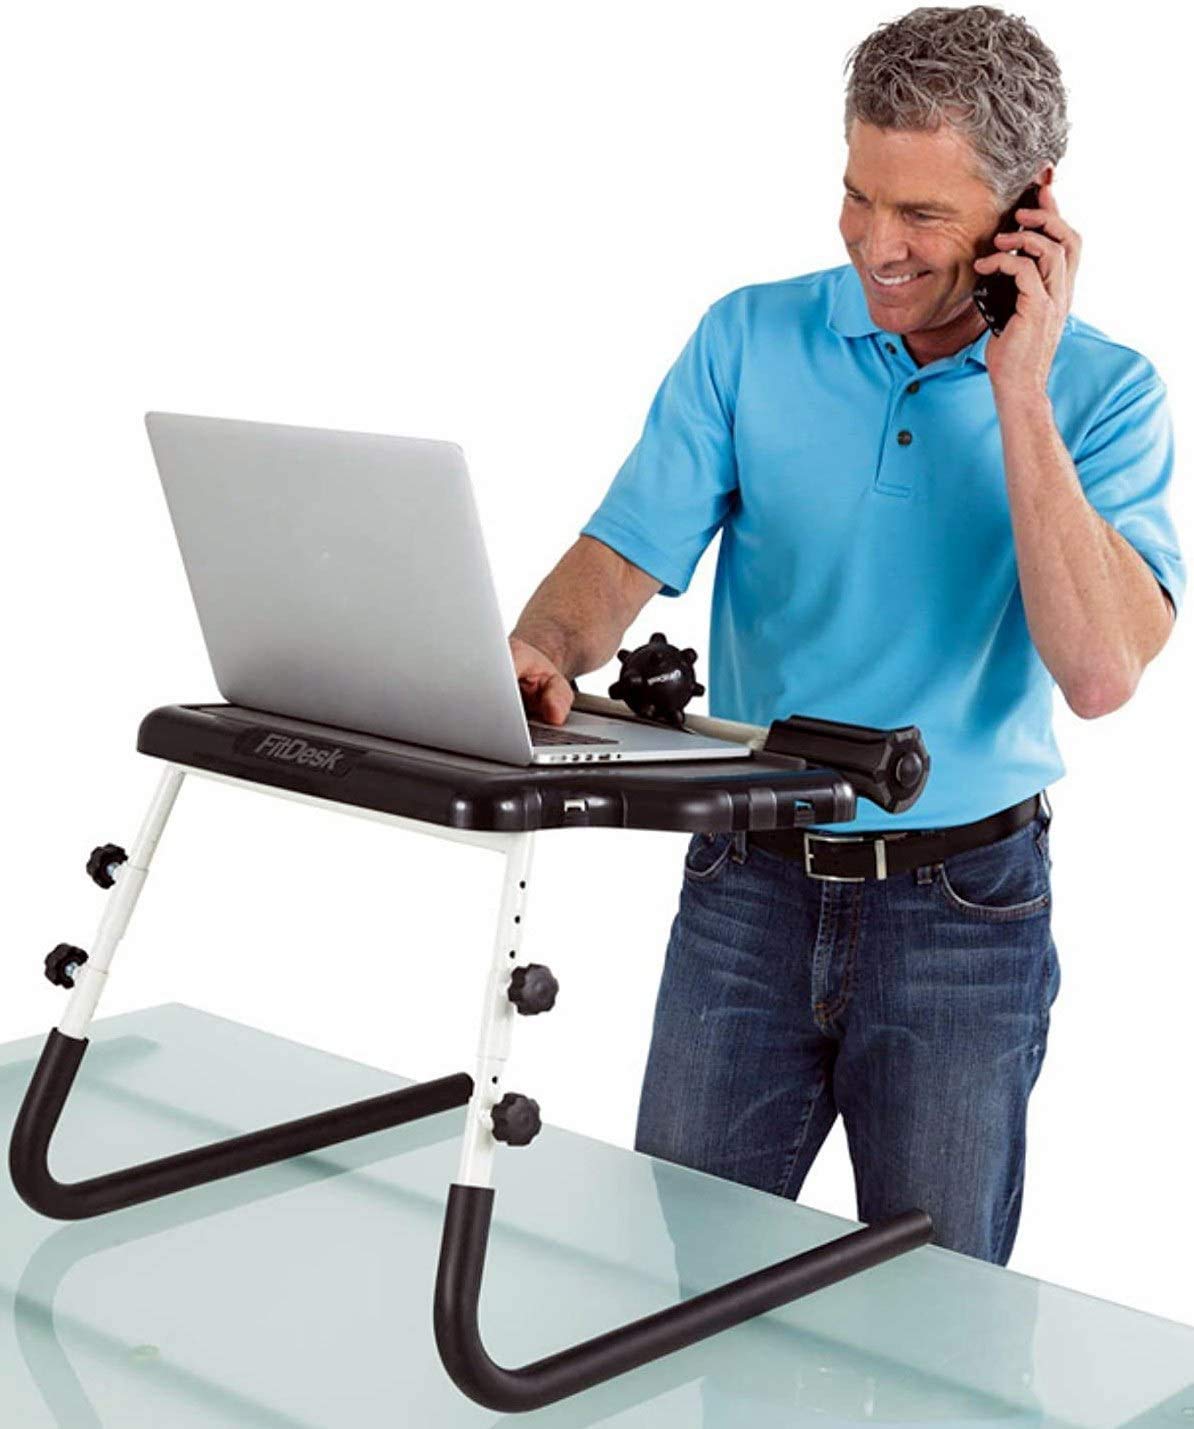 FitDesk Table Top Standing Desk with Massage Rollers and Forearm Supports - Soft Grip Surface Tablet Holder - No Scratch Grip Legs - Height Adjusta...